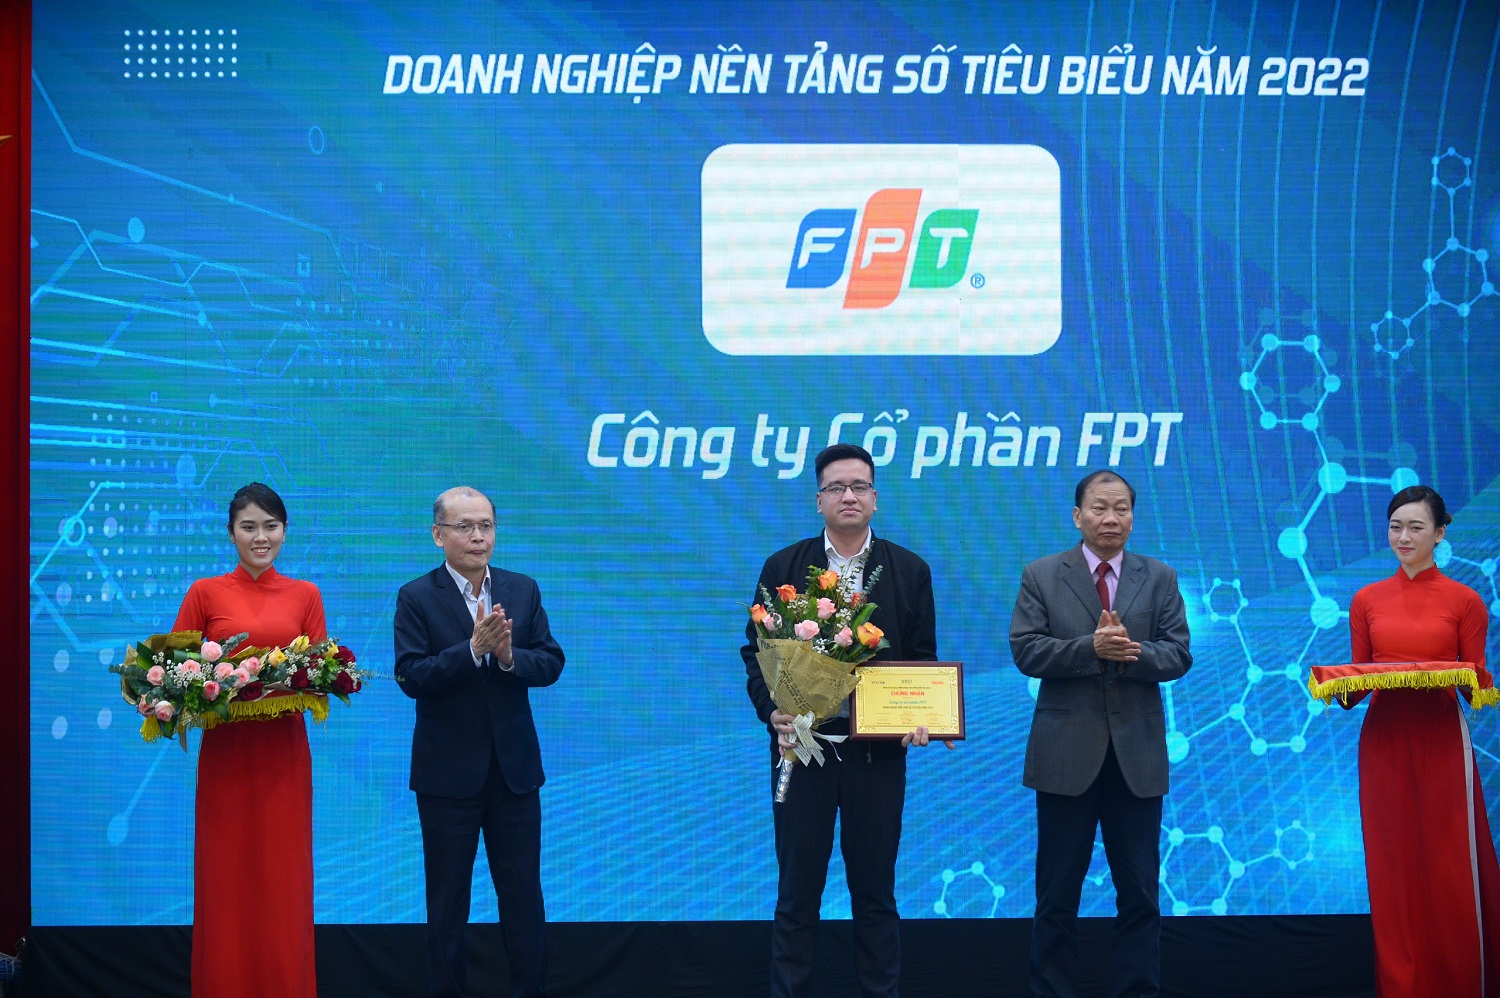 FPT's representative (in the middle of the picture) received the "Top Enterprises with Digital Platforms" award